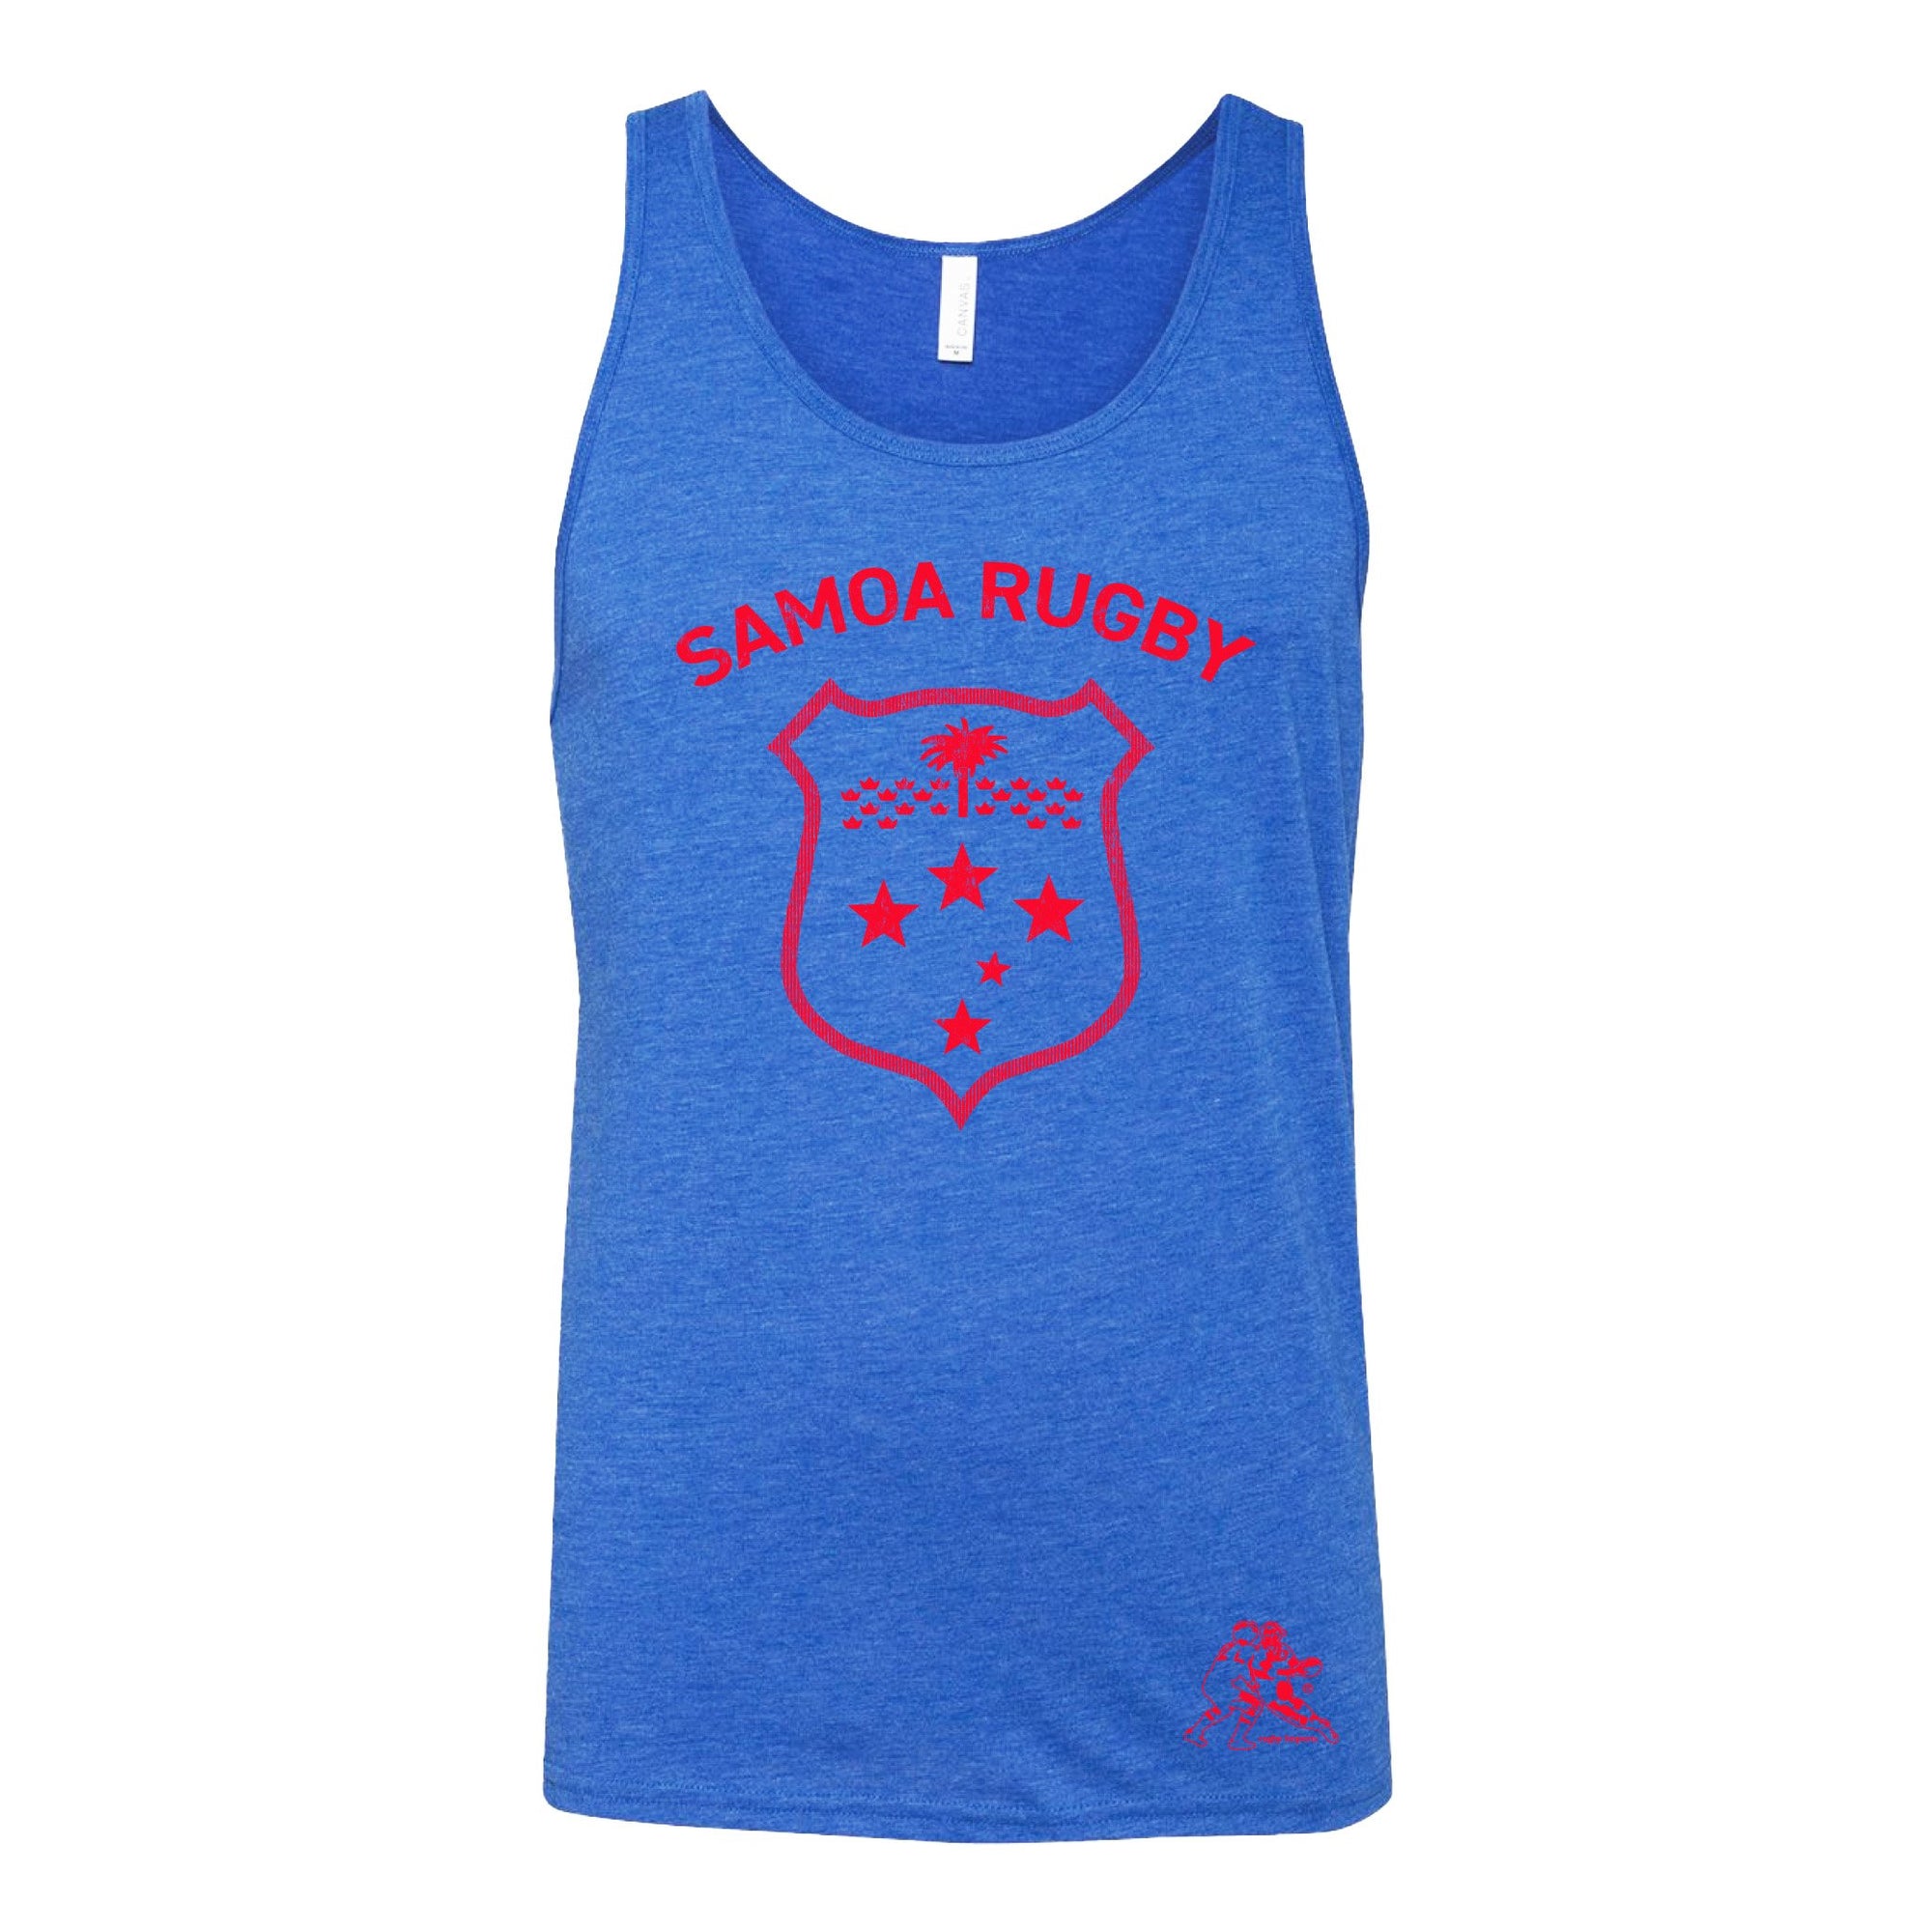 Rugby Imports Samoa Rugby Tank Top